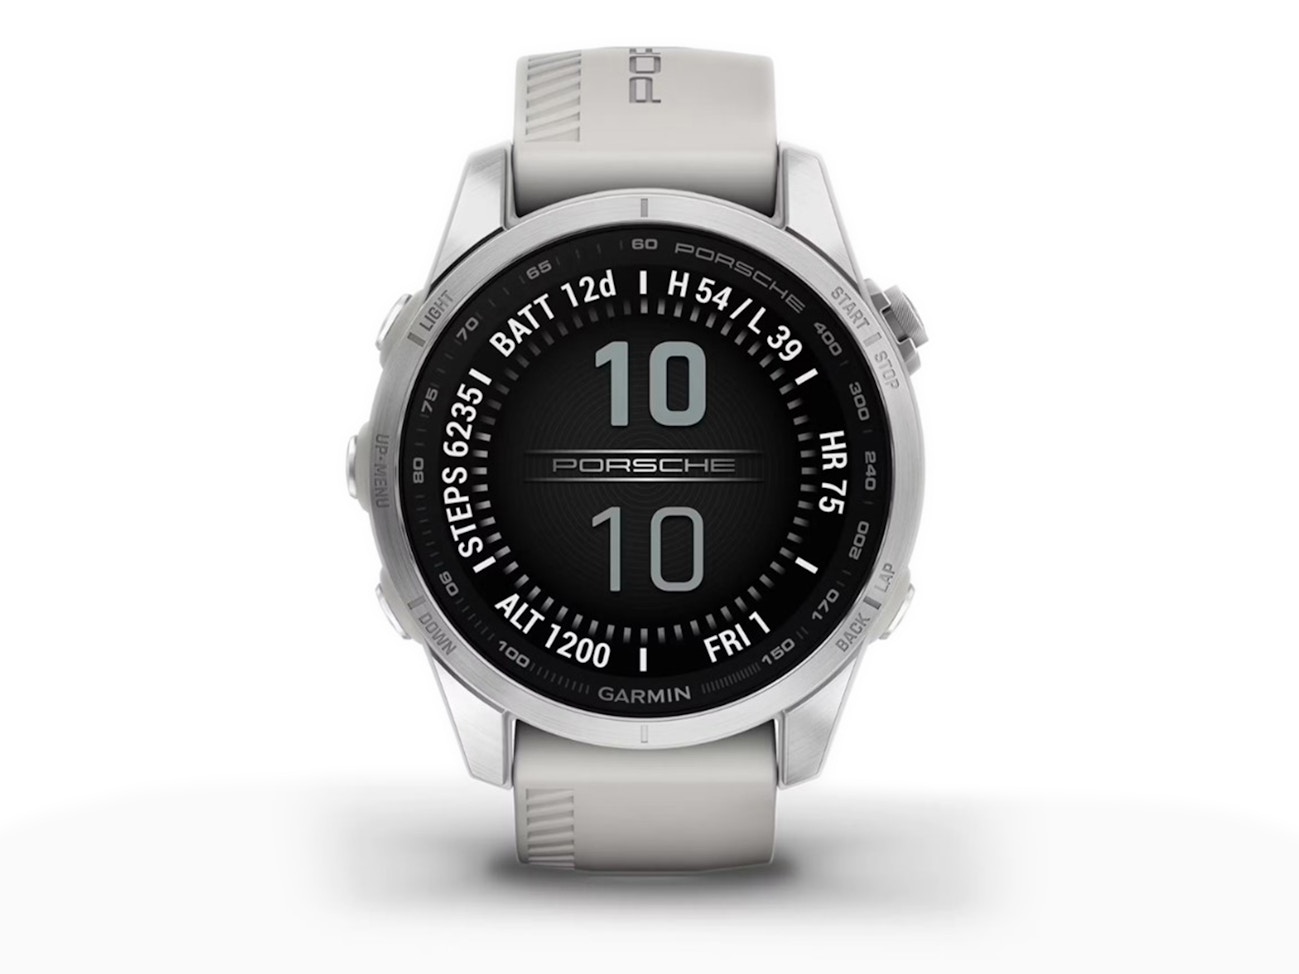 GPS multisport smartwatch with unique Porsche details and extensive fitness and health features.